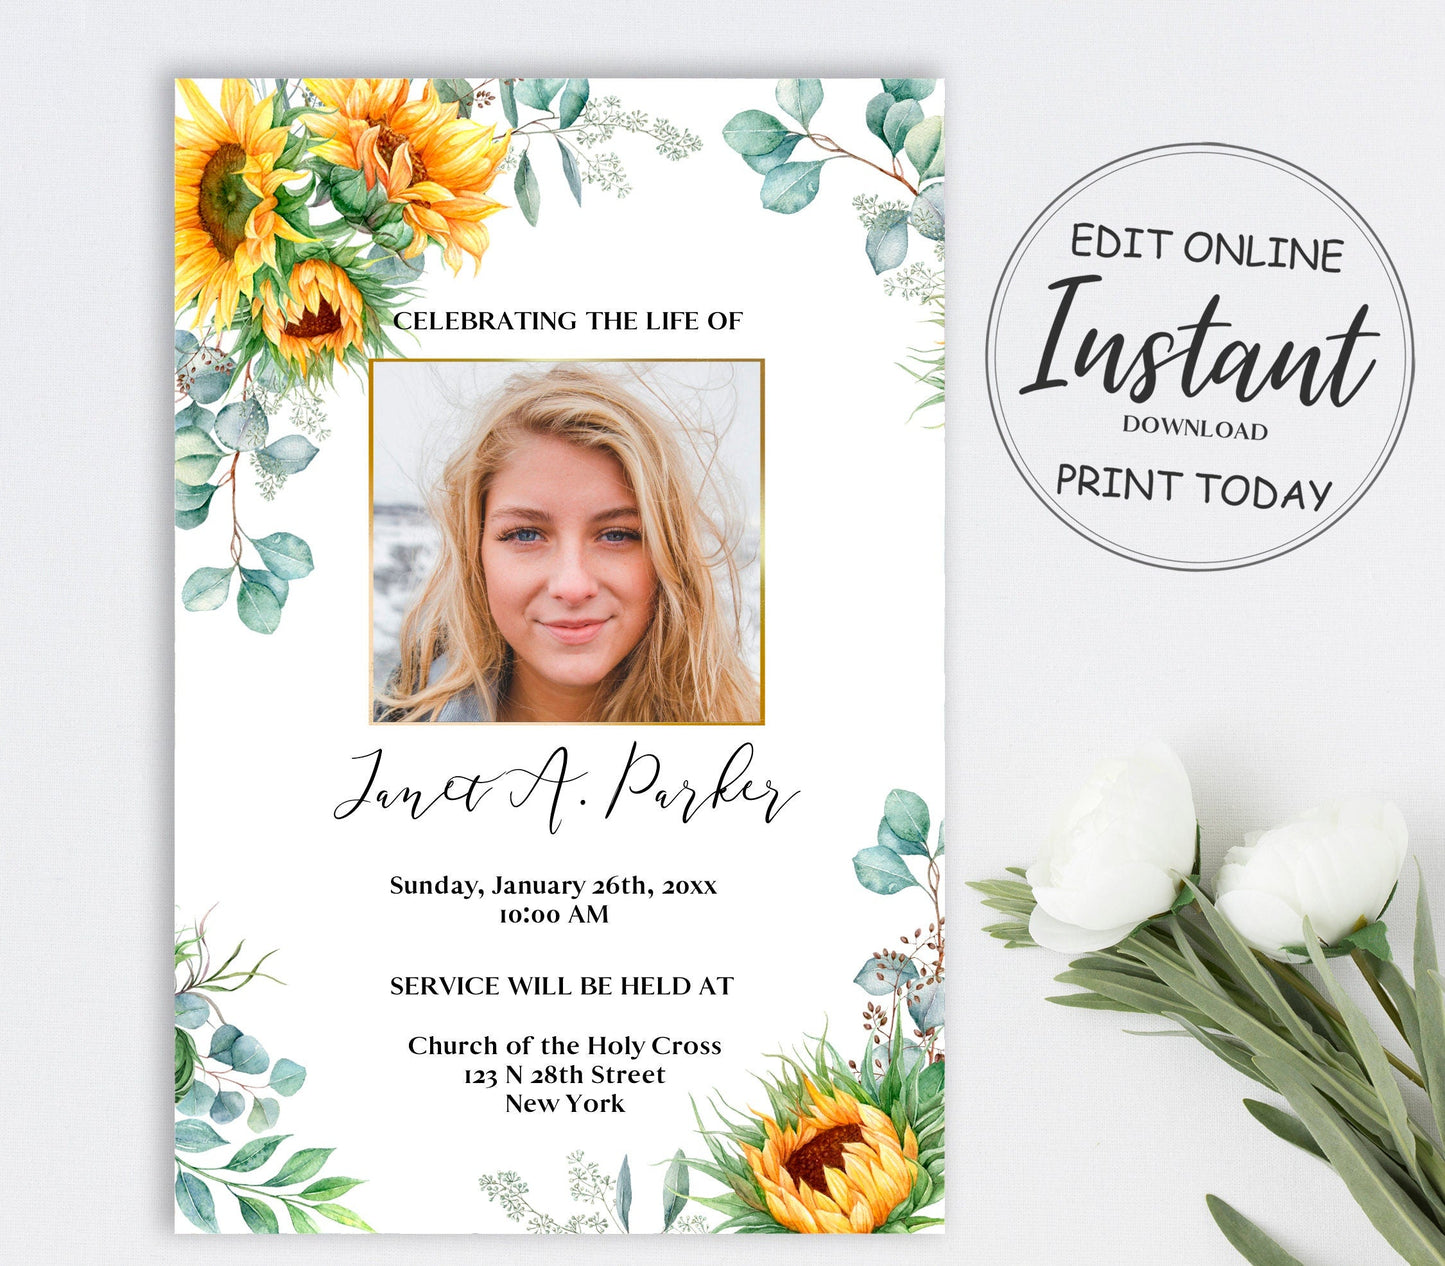 Greenery with sunflowers througout this funeral invitation and gold center photo